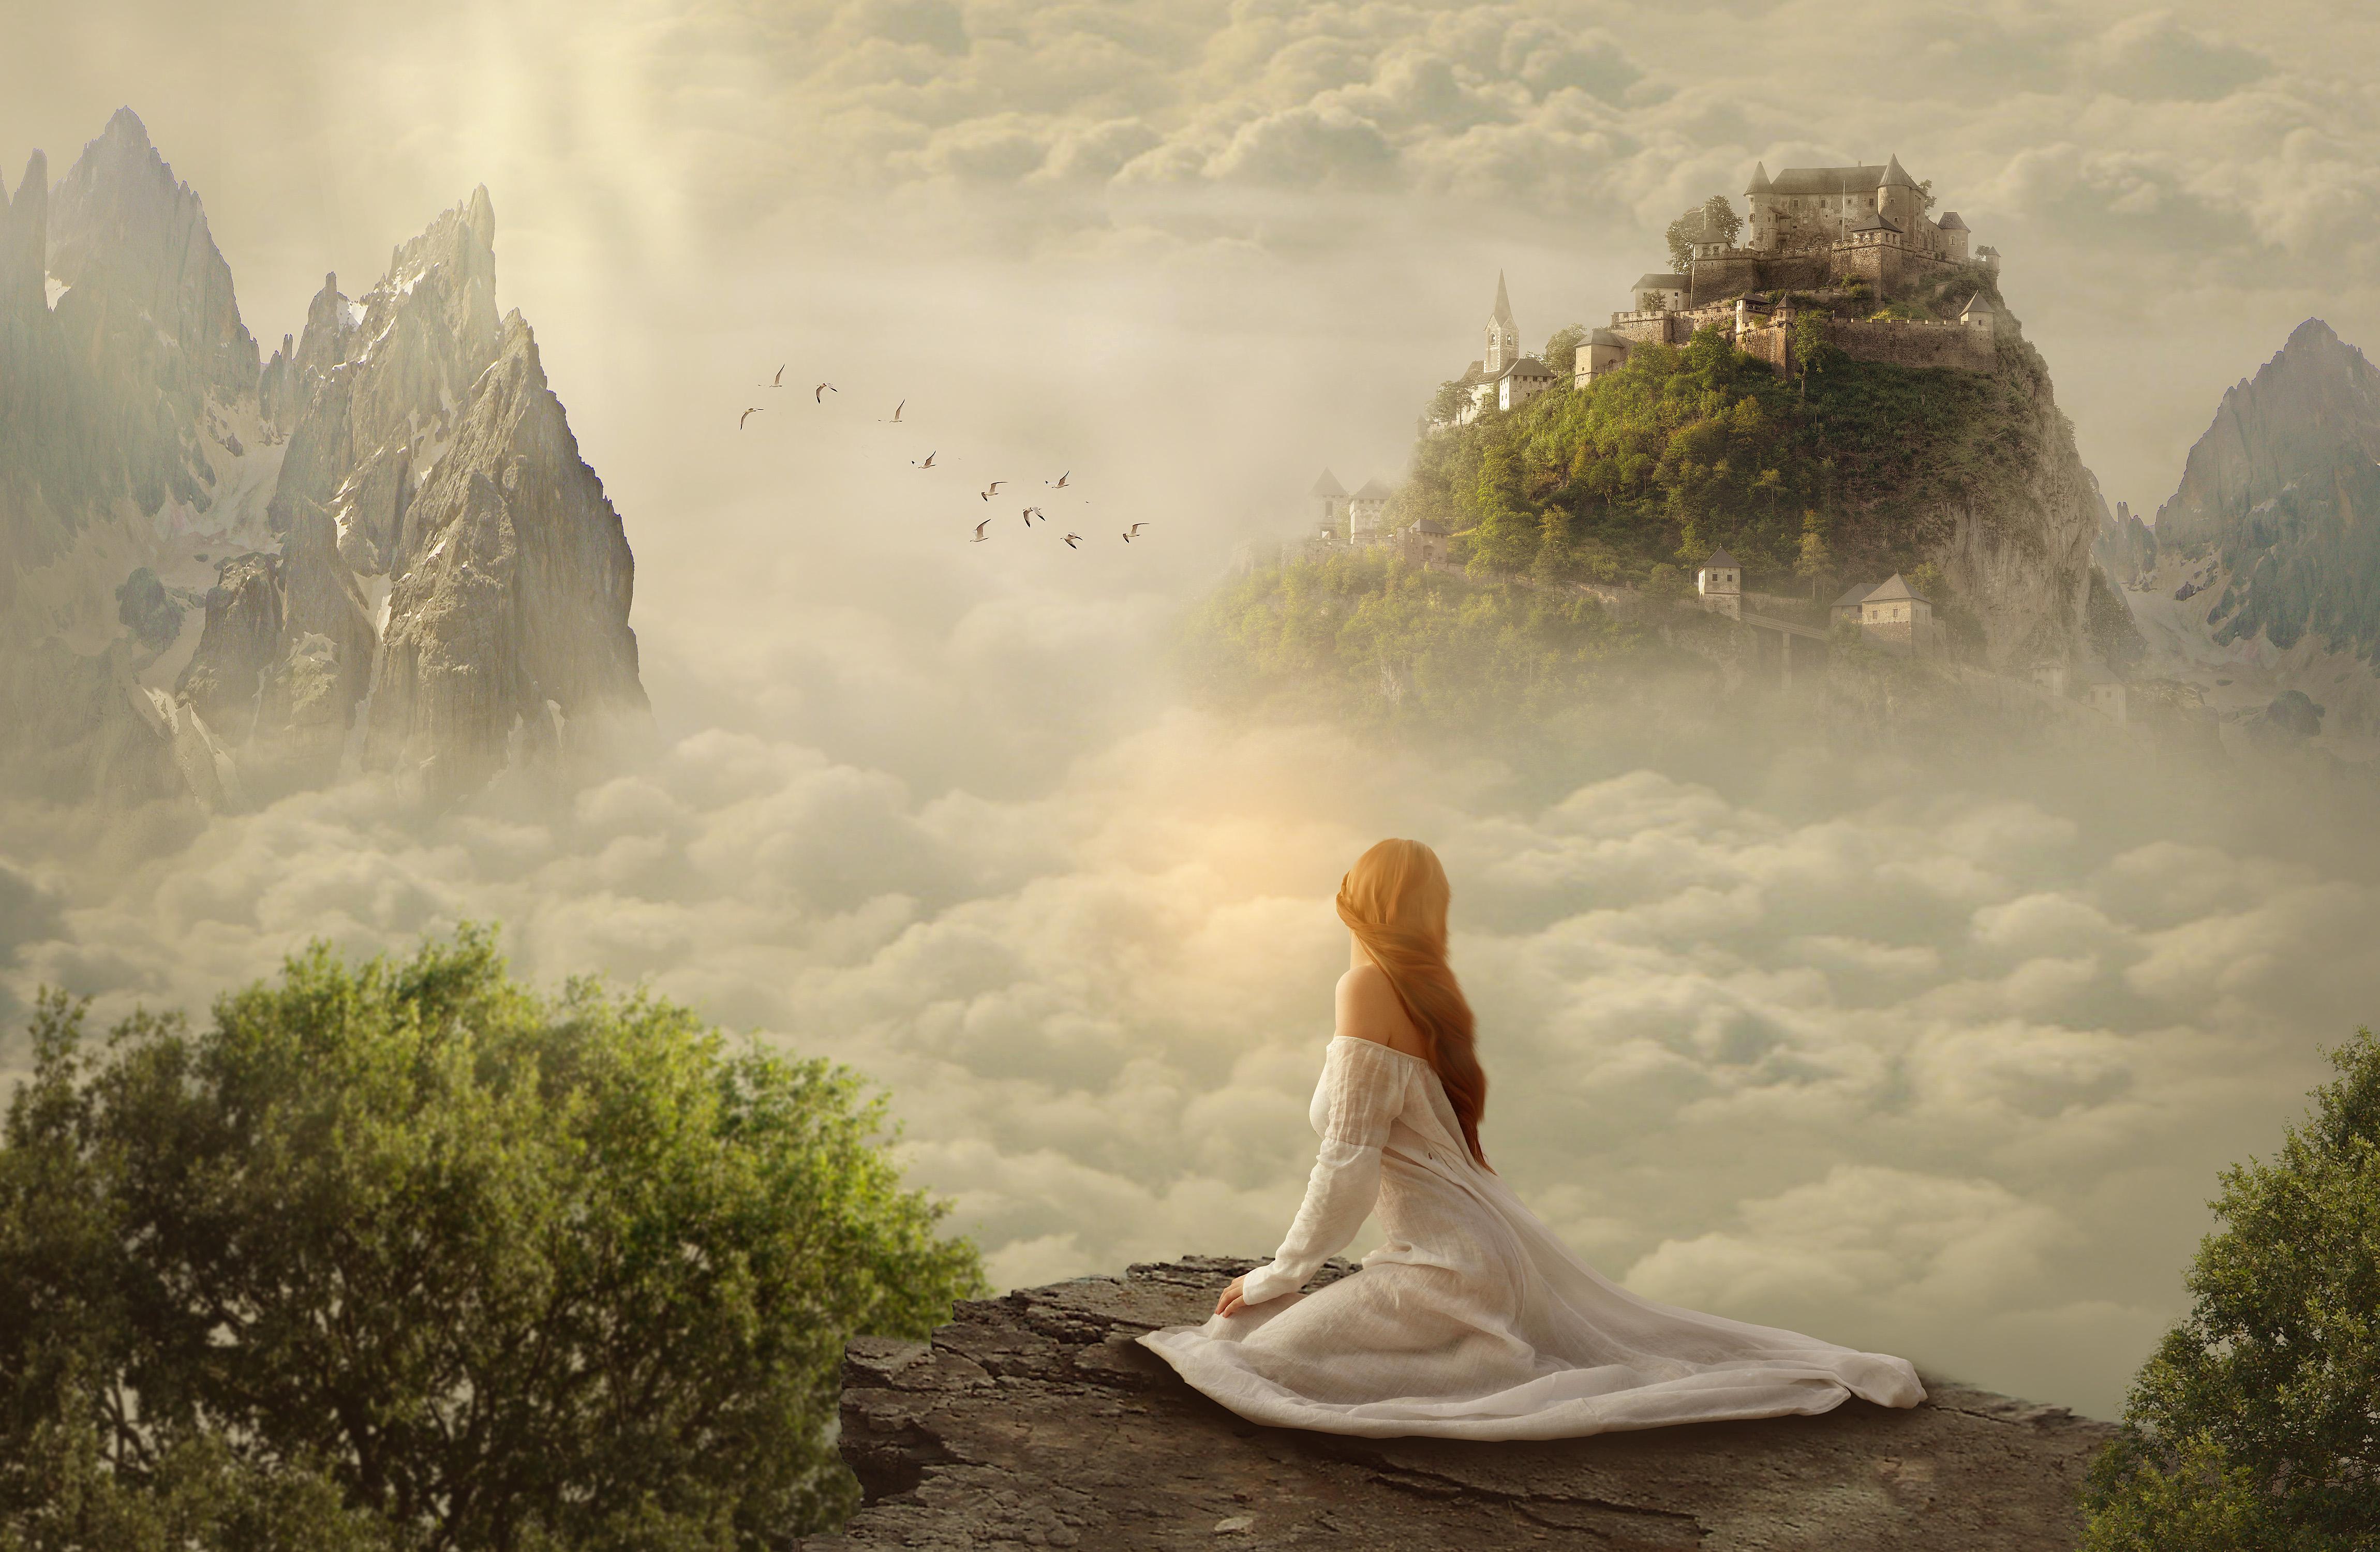 #Dream, #Woman, #Clouds, #Mountains, #Girl, K